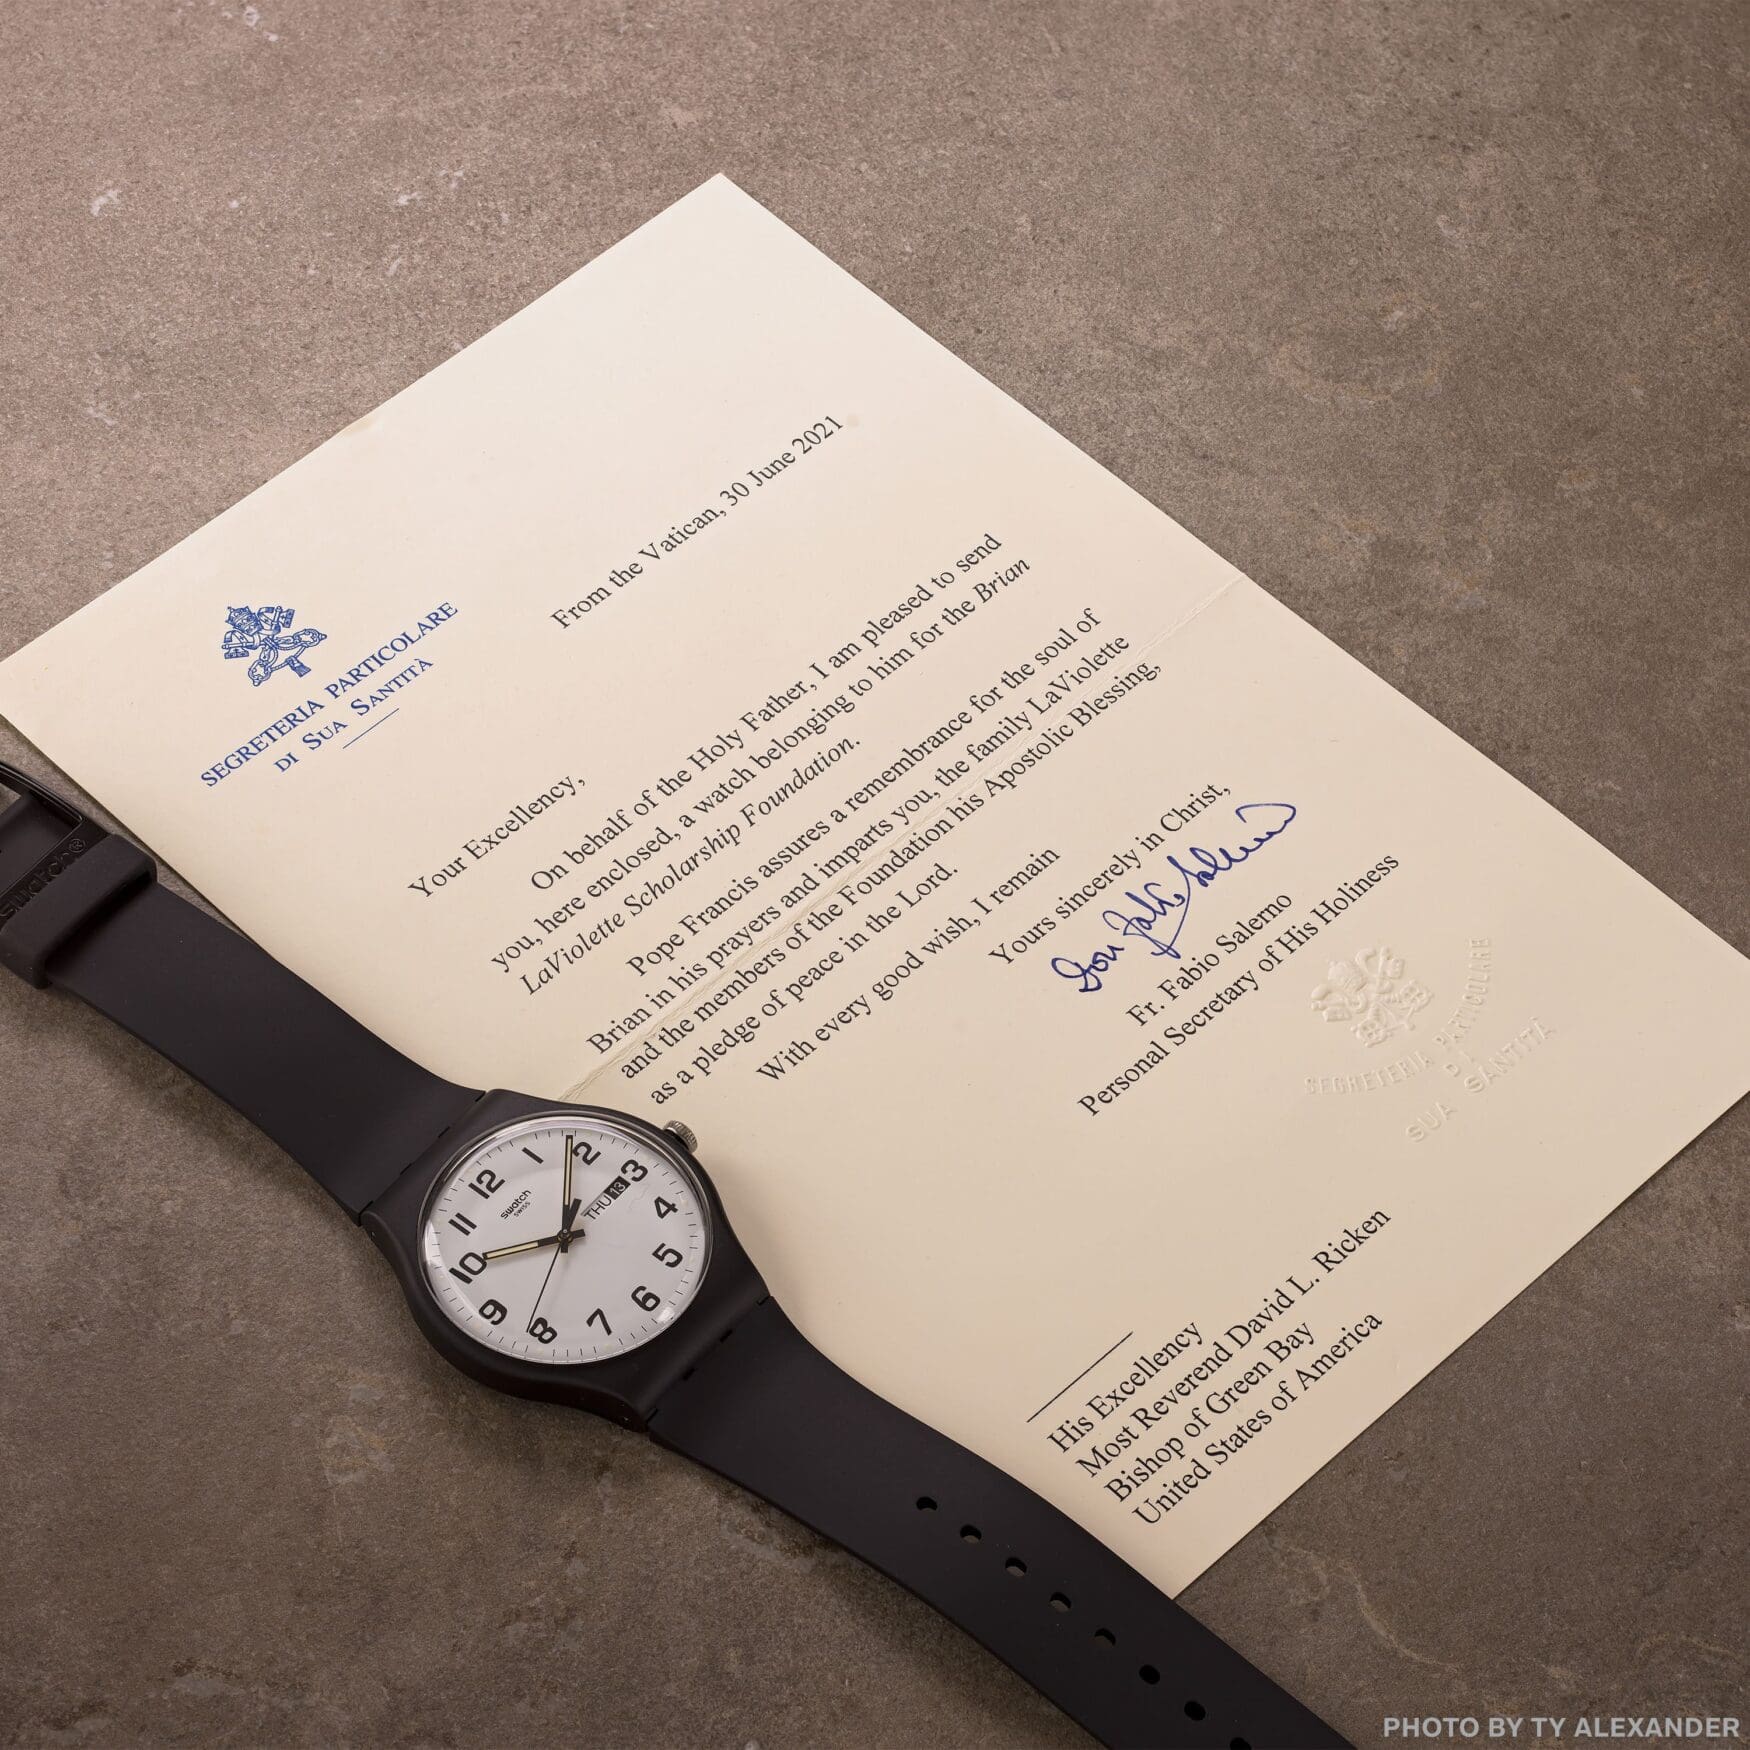 Watches from the Pope, Randall Park, Coach K, Betty White to be auctioned off for charity